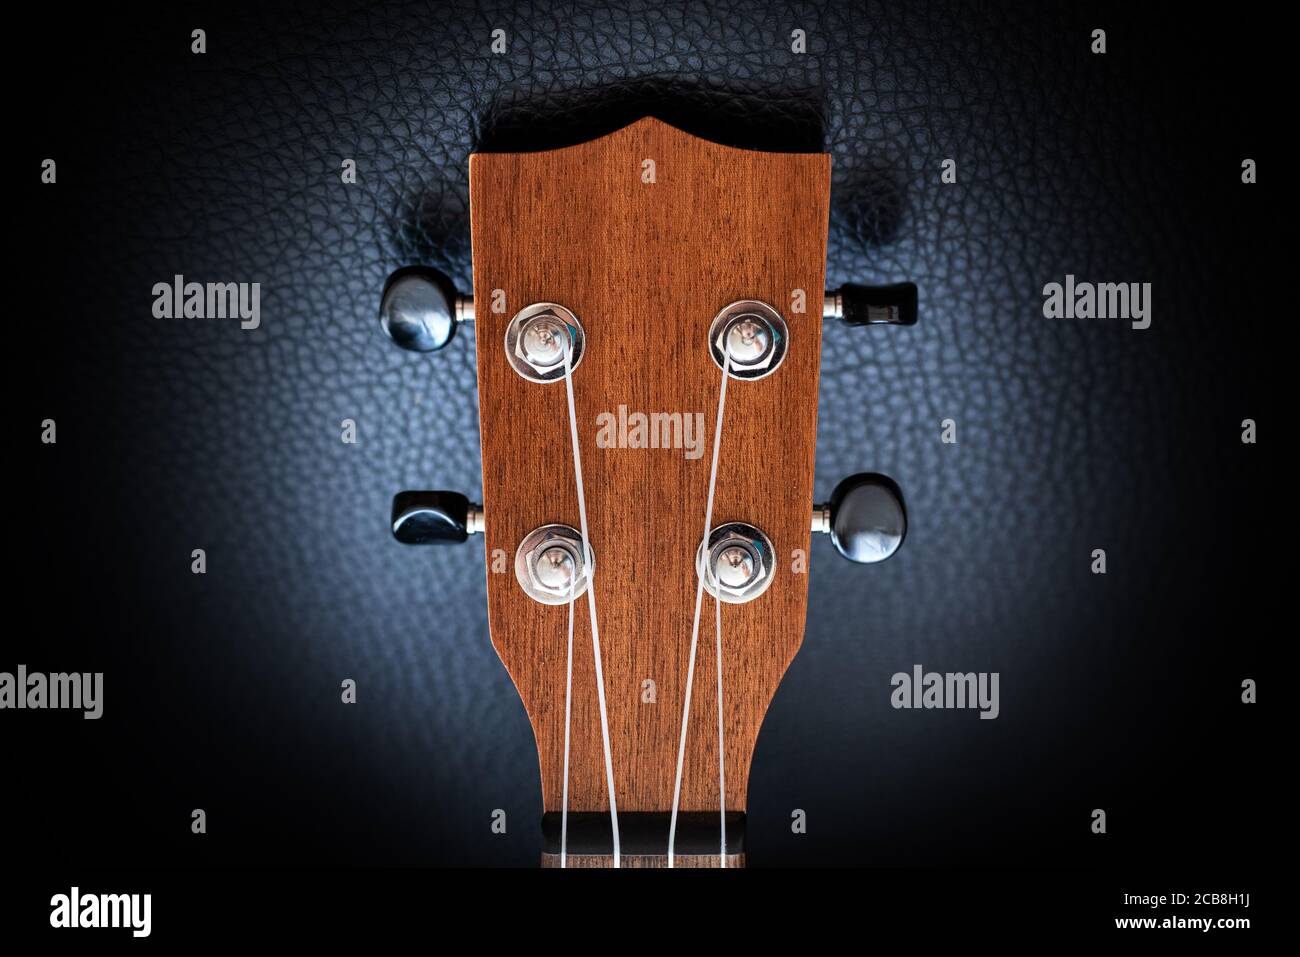 Close up view of a wooden ukulele headstock spotlighted and isolated on a black background. Stock Photo